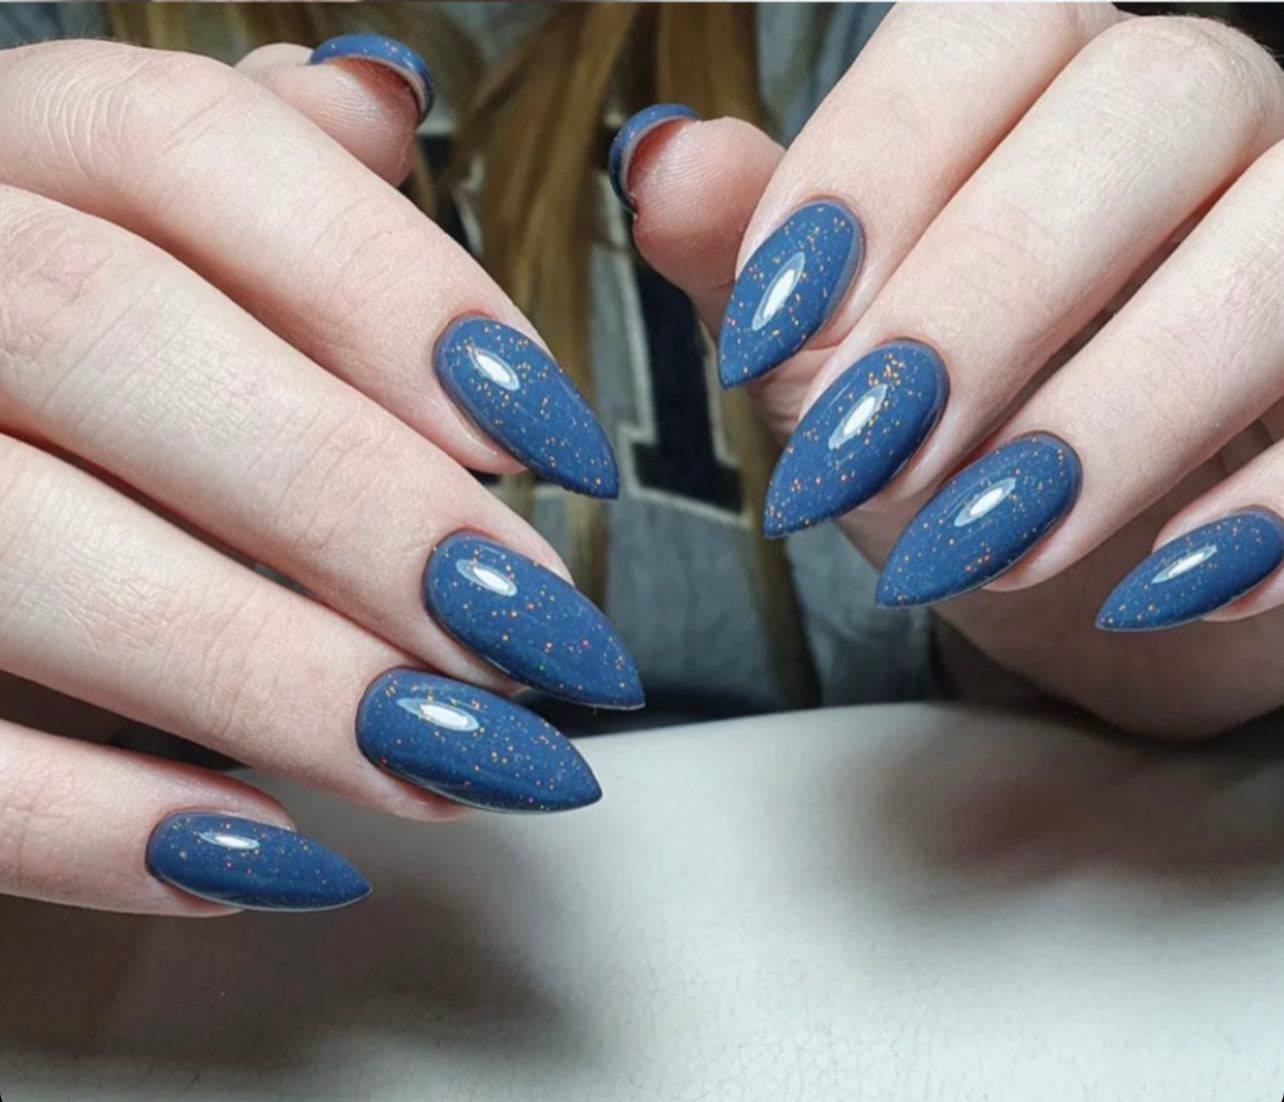 How to Paint Your Nails : 9 Steps (with Pictures) - Instructables